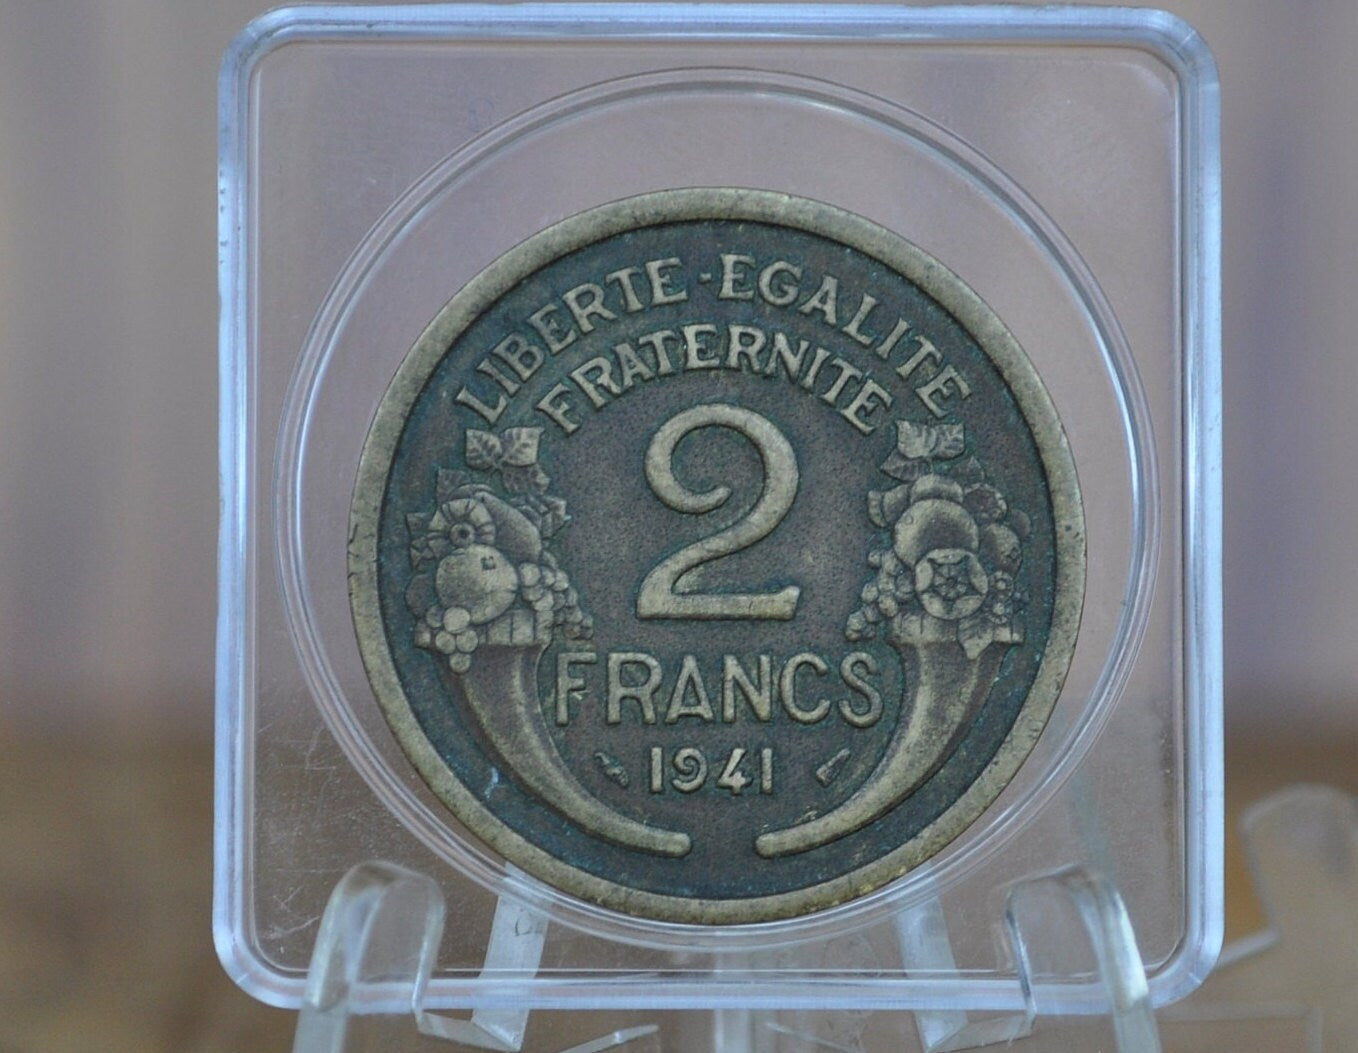 1938, 1939 & 1941 French 2 Francs - Choose by Date - Amazing Condition - "Repvbliqve Francaise" - 1930's and 1940's Two Francs